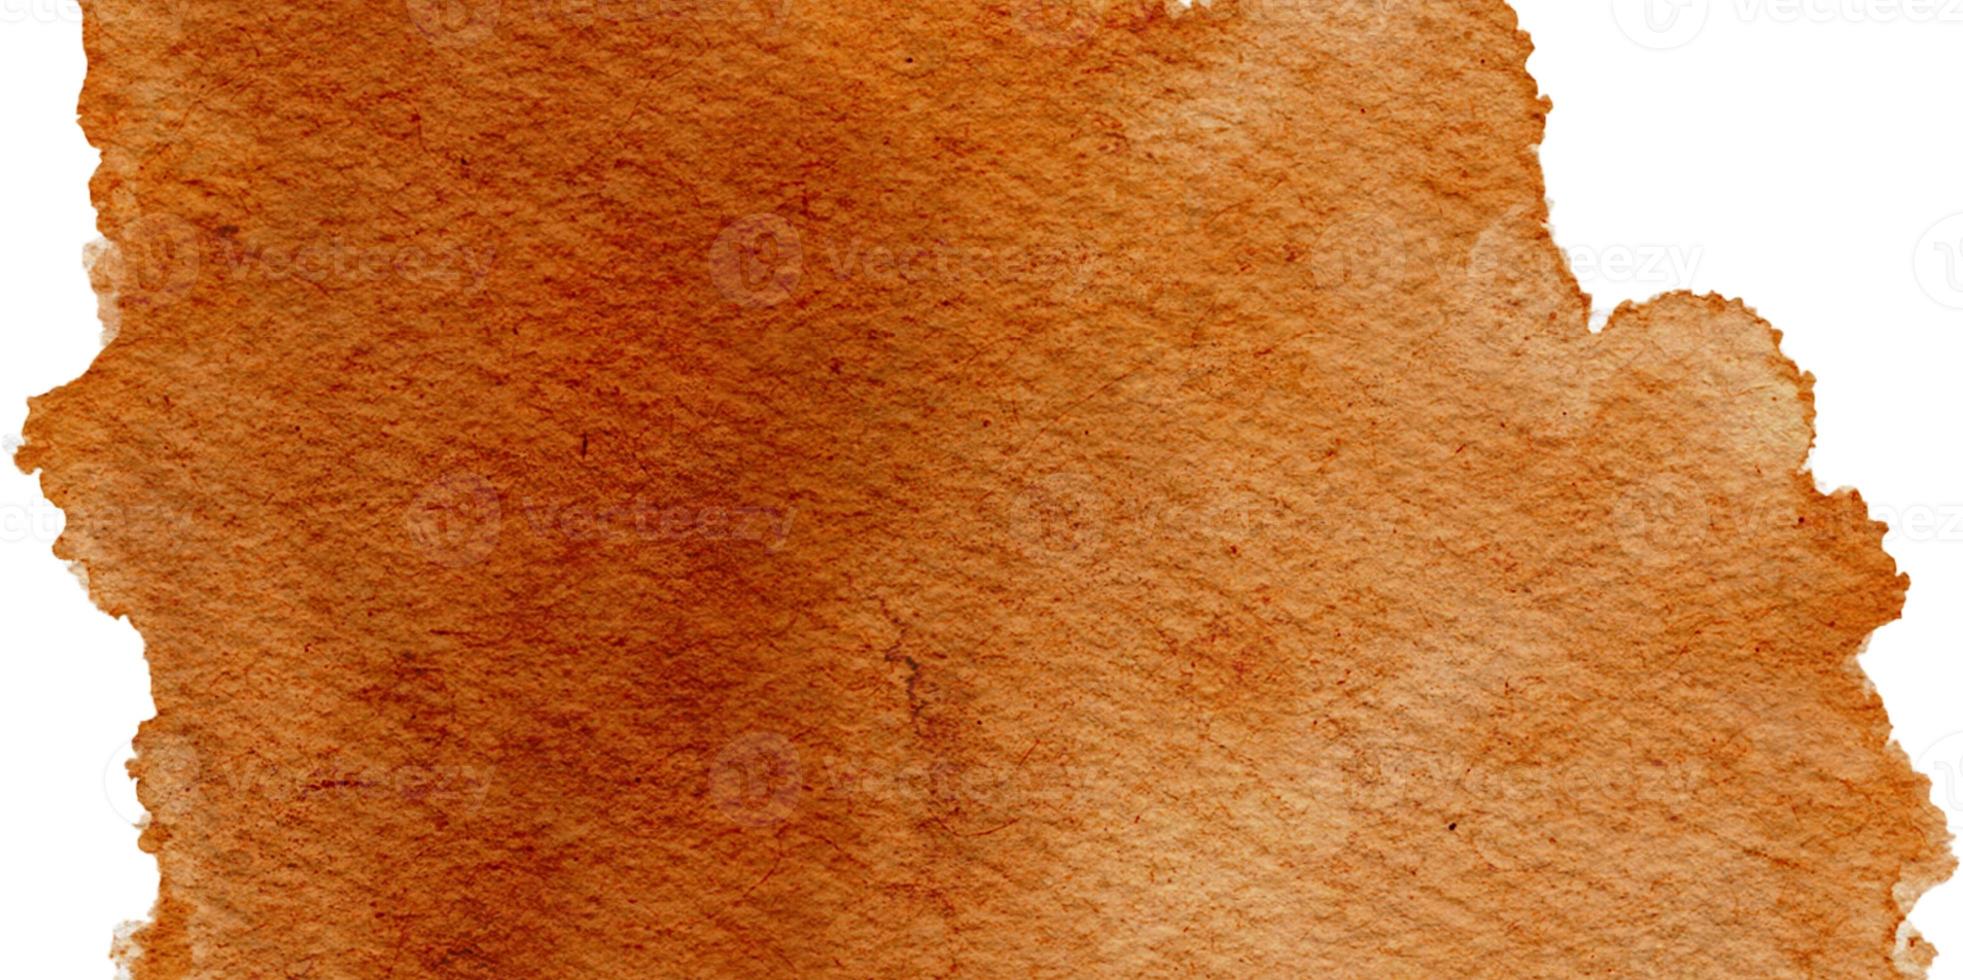 Background with rust, brown rusty iron texture photo